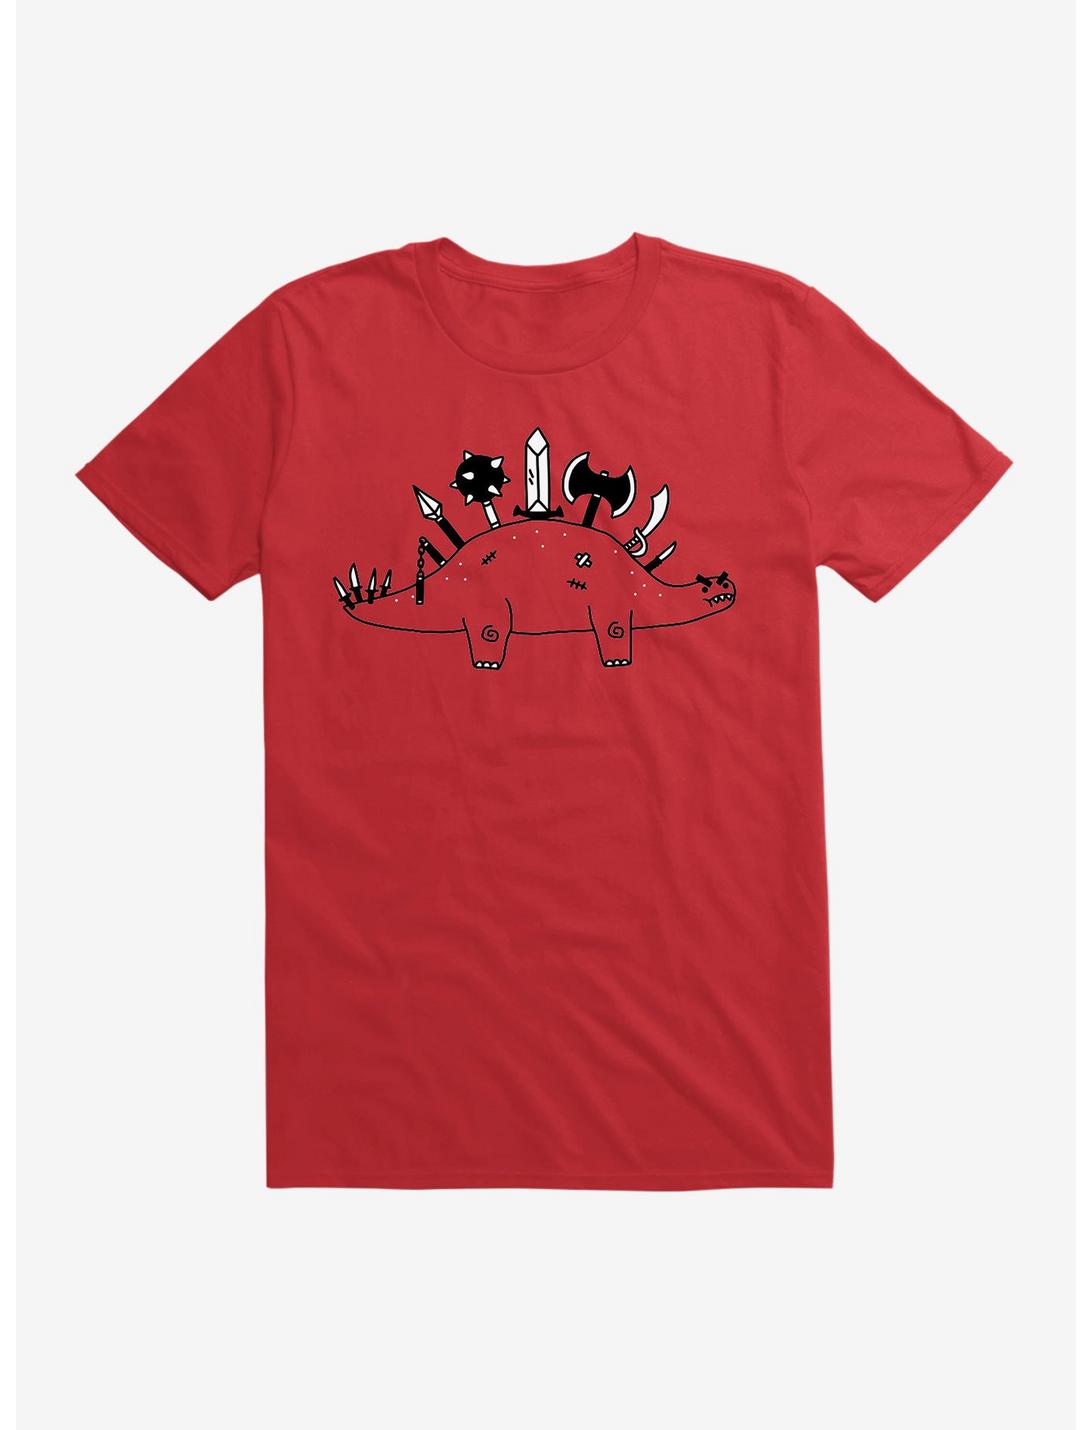 The Best Defense Is A Good Offense T-Shirt, RED, hi-res